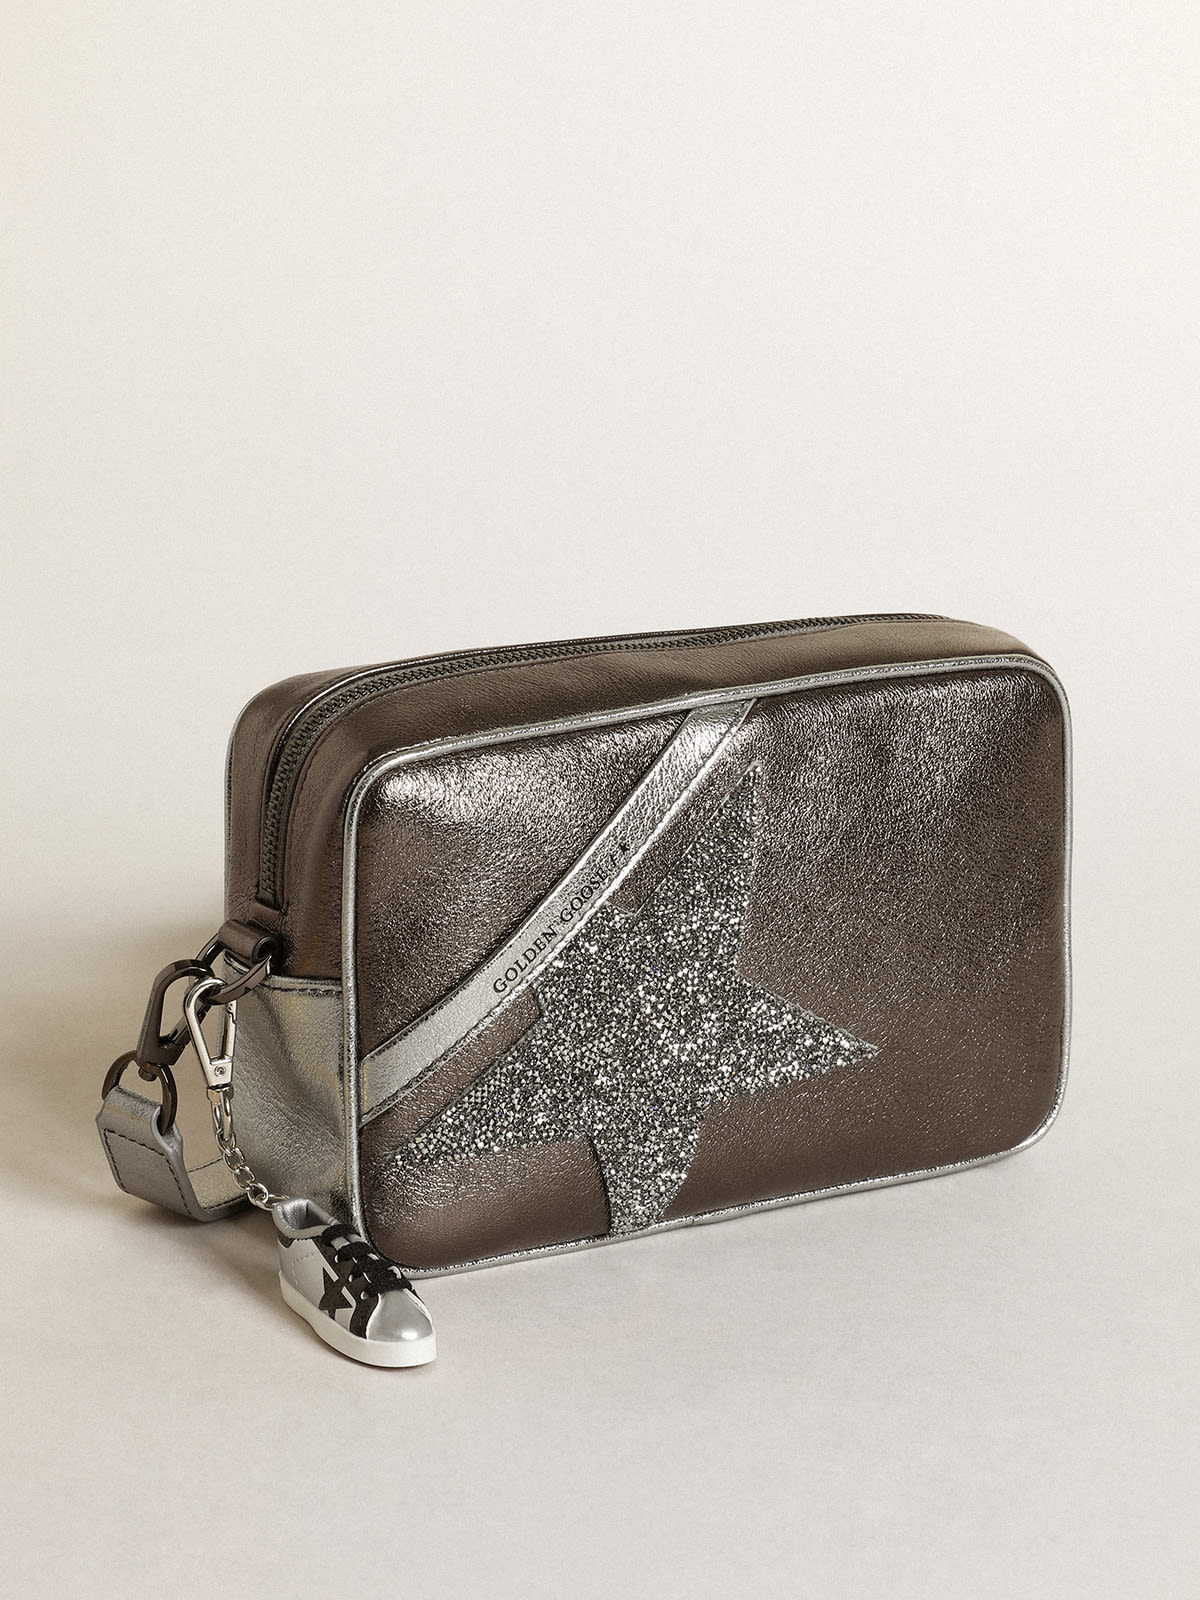 Golden Goose - Women's Star Bag in silver leather with Swarovski crystal star in 